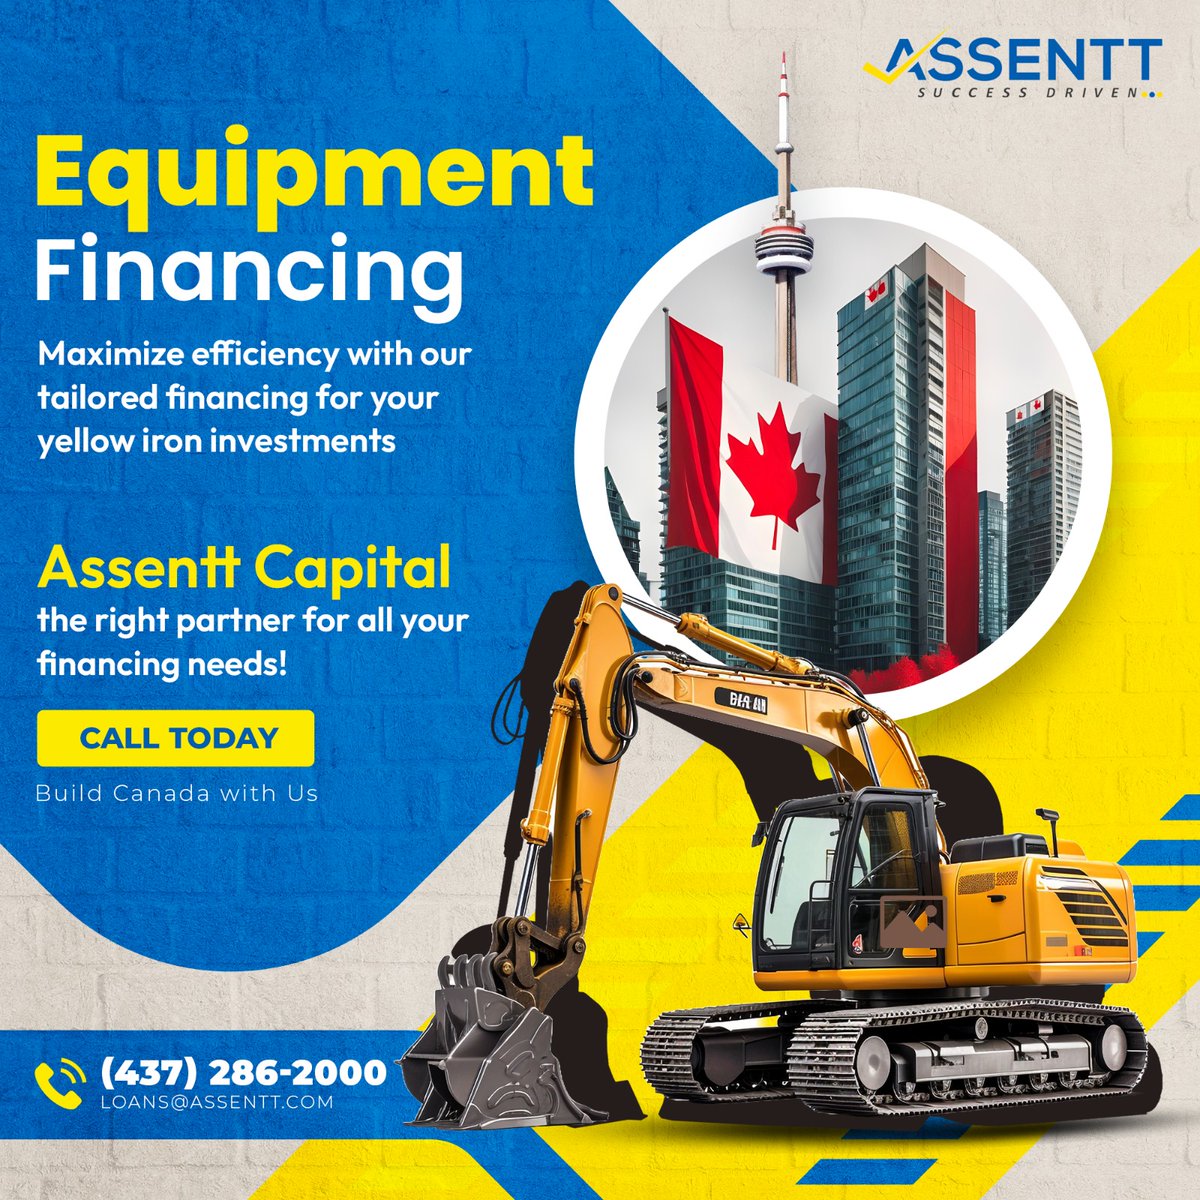 Using Equipment Financing you can buy, lease, upgrade or repair equipment quickly. #CPA #BALBIRSINGHSAINI #ASSENTT #businespurchase #5starreview #businessplan #funds #loan #equipment #equipmentfinancing #smallbusinessloan #tax #business #Truck #Truckers #Trailer #truckdriver